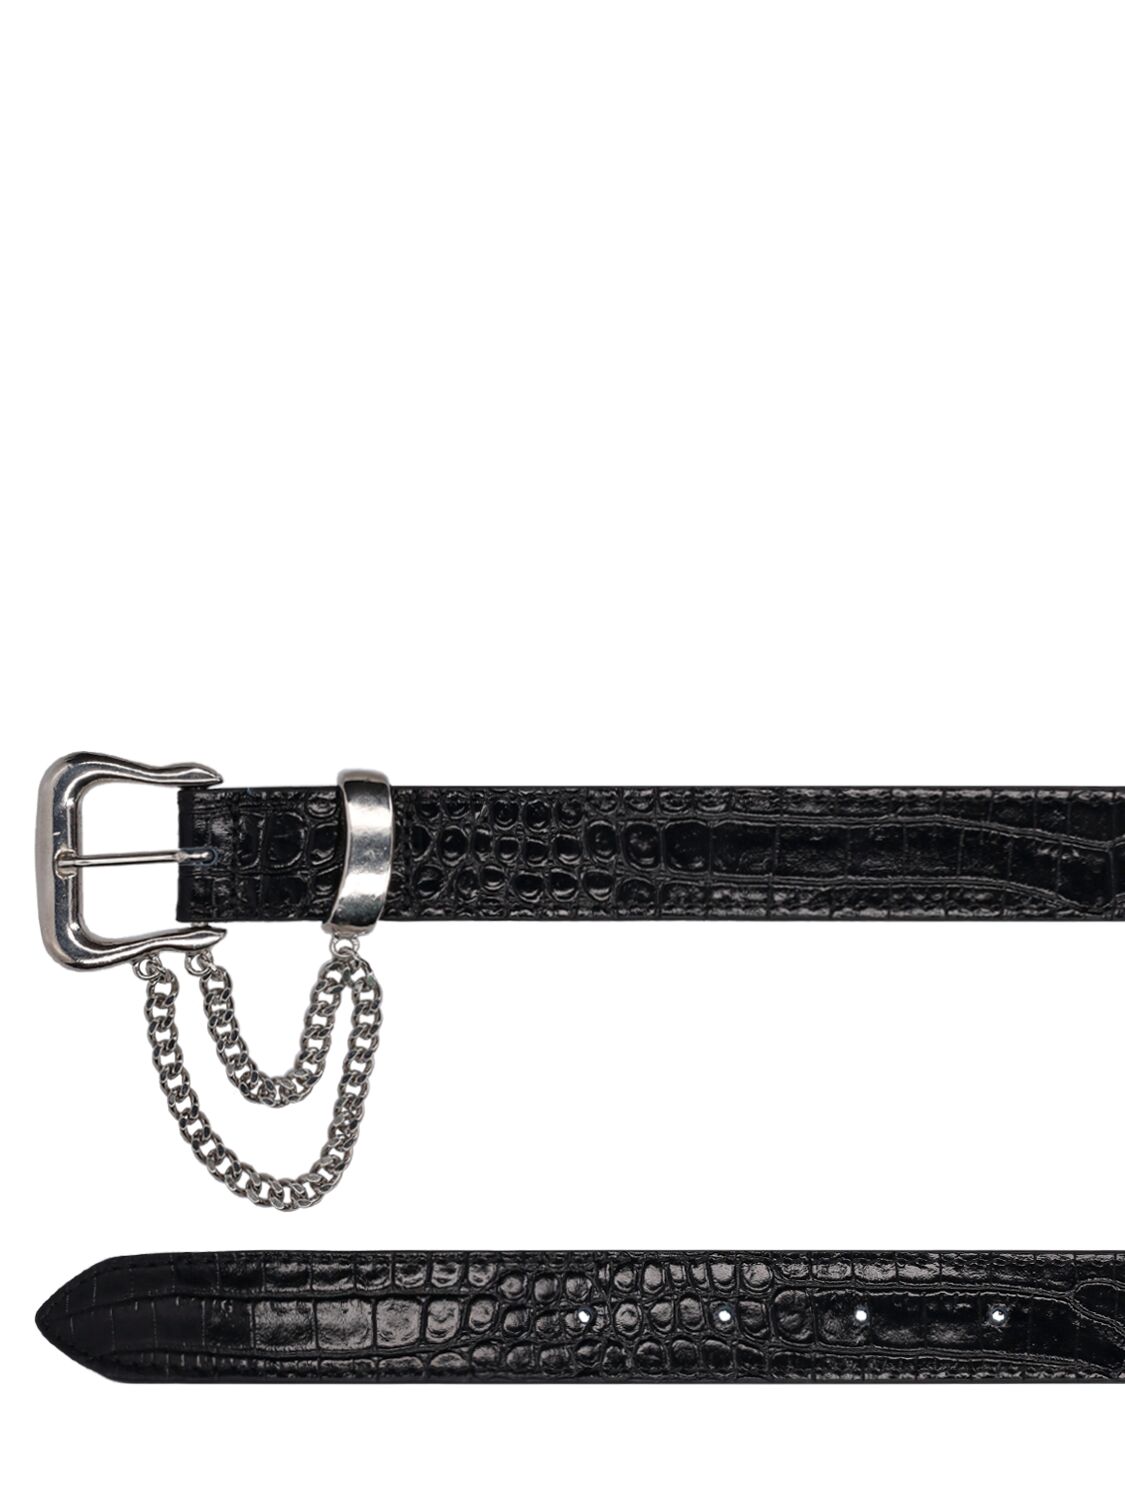 Shop Alessandra Rich Embossed Leather Belt W/ Chain In Black,silver